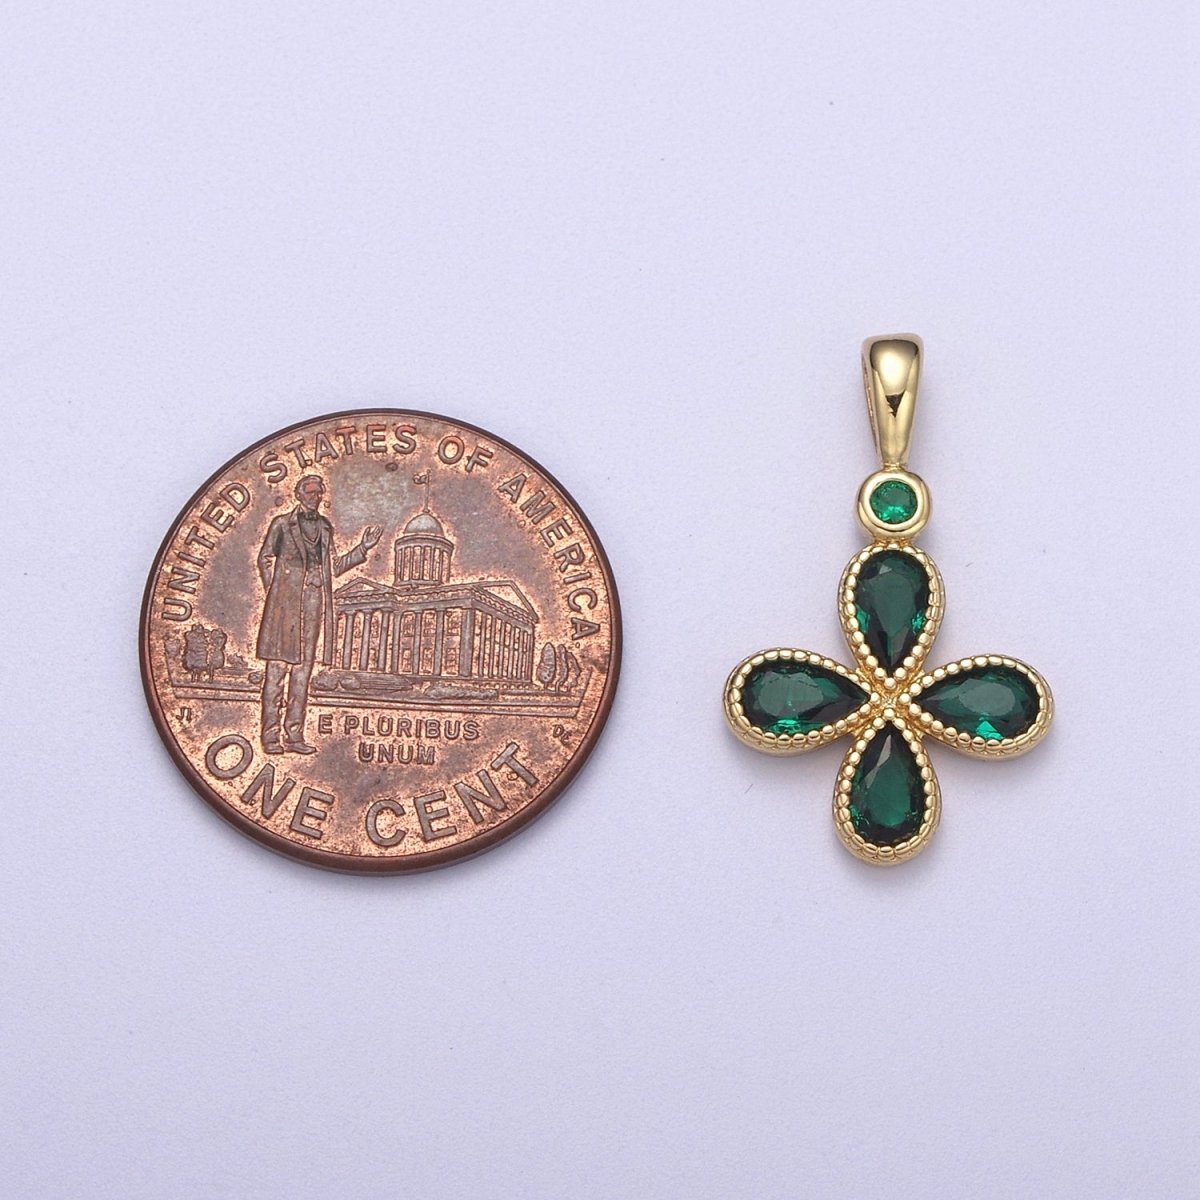 Four Leaf Clover Gold Filled lucky charm pendant necklace good luck charm H-131 H-135 - DLUXCA